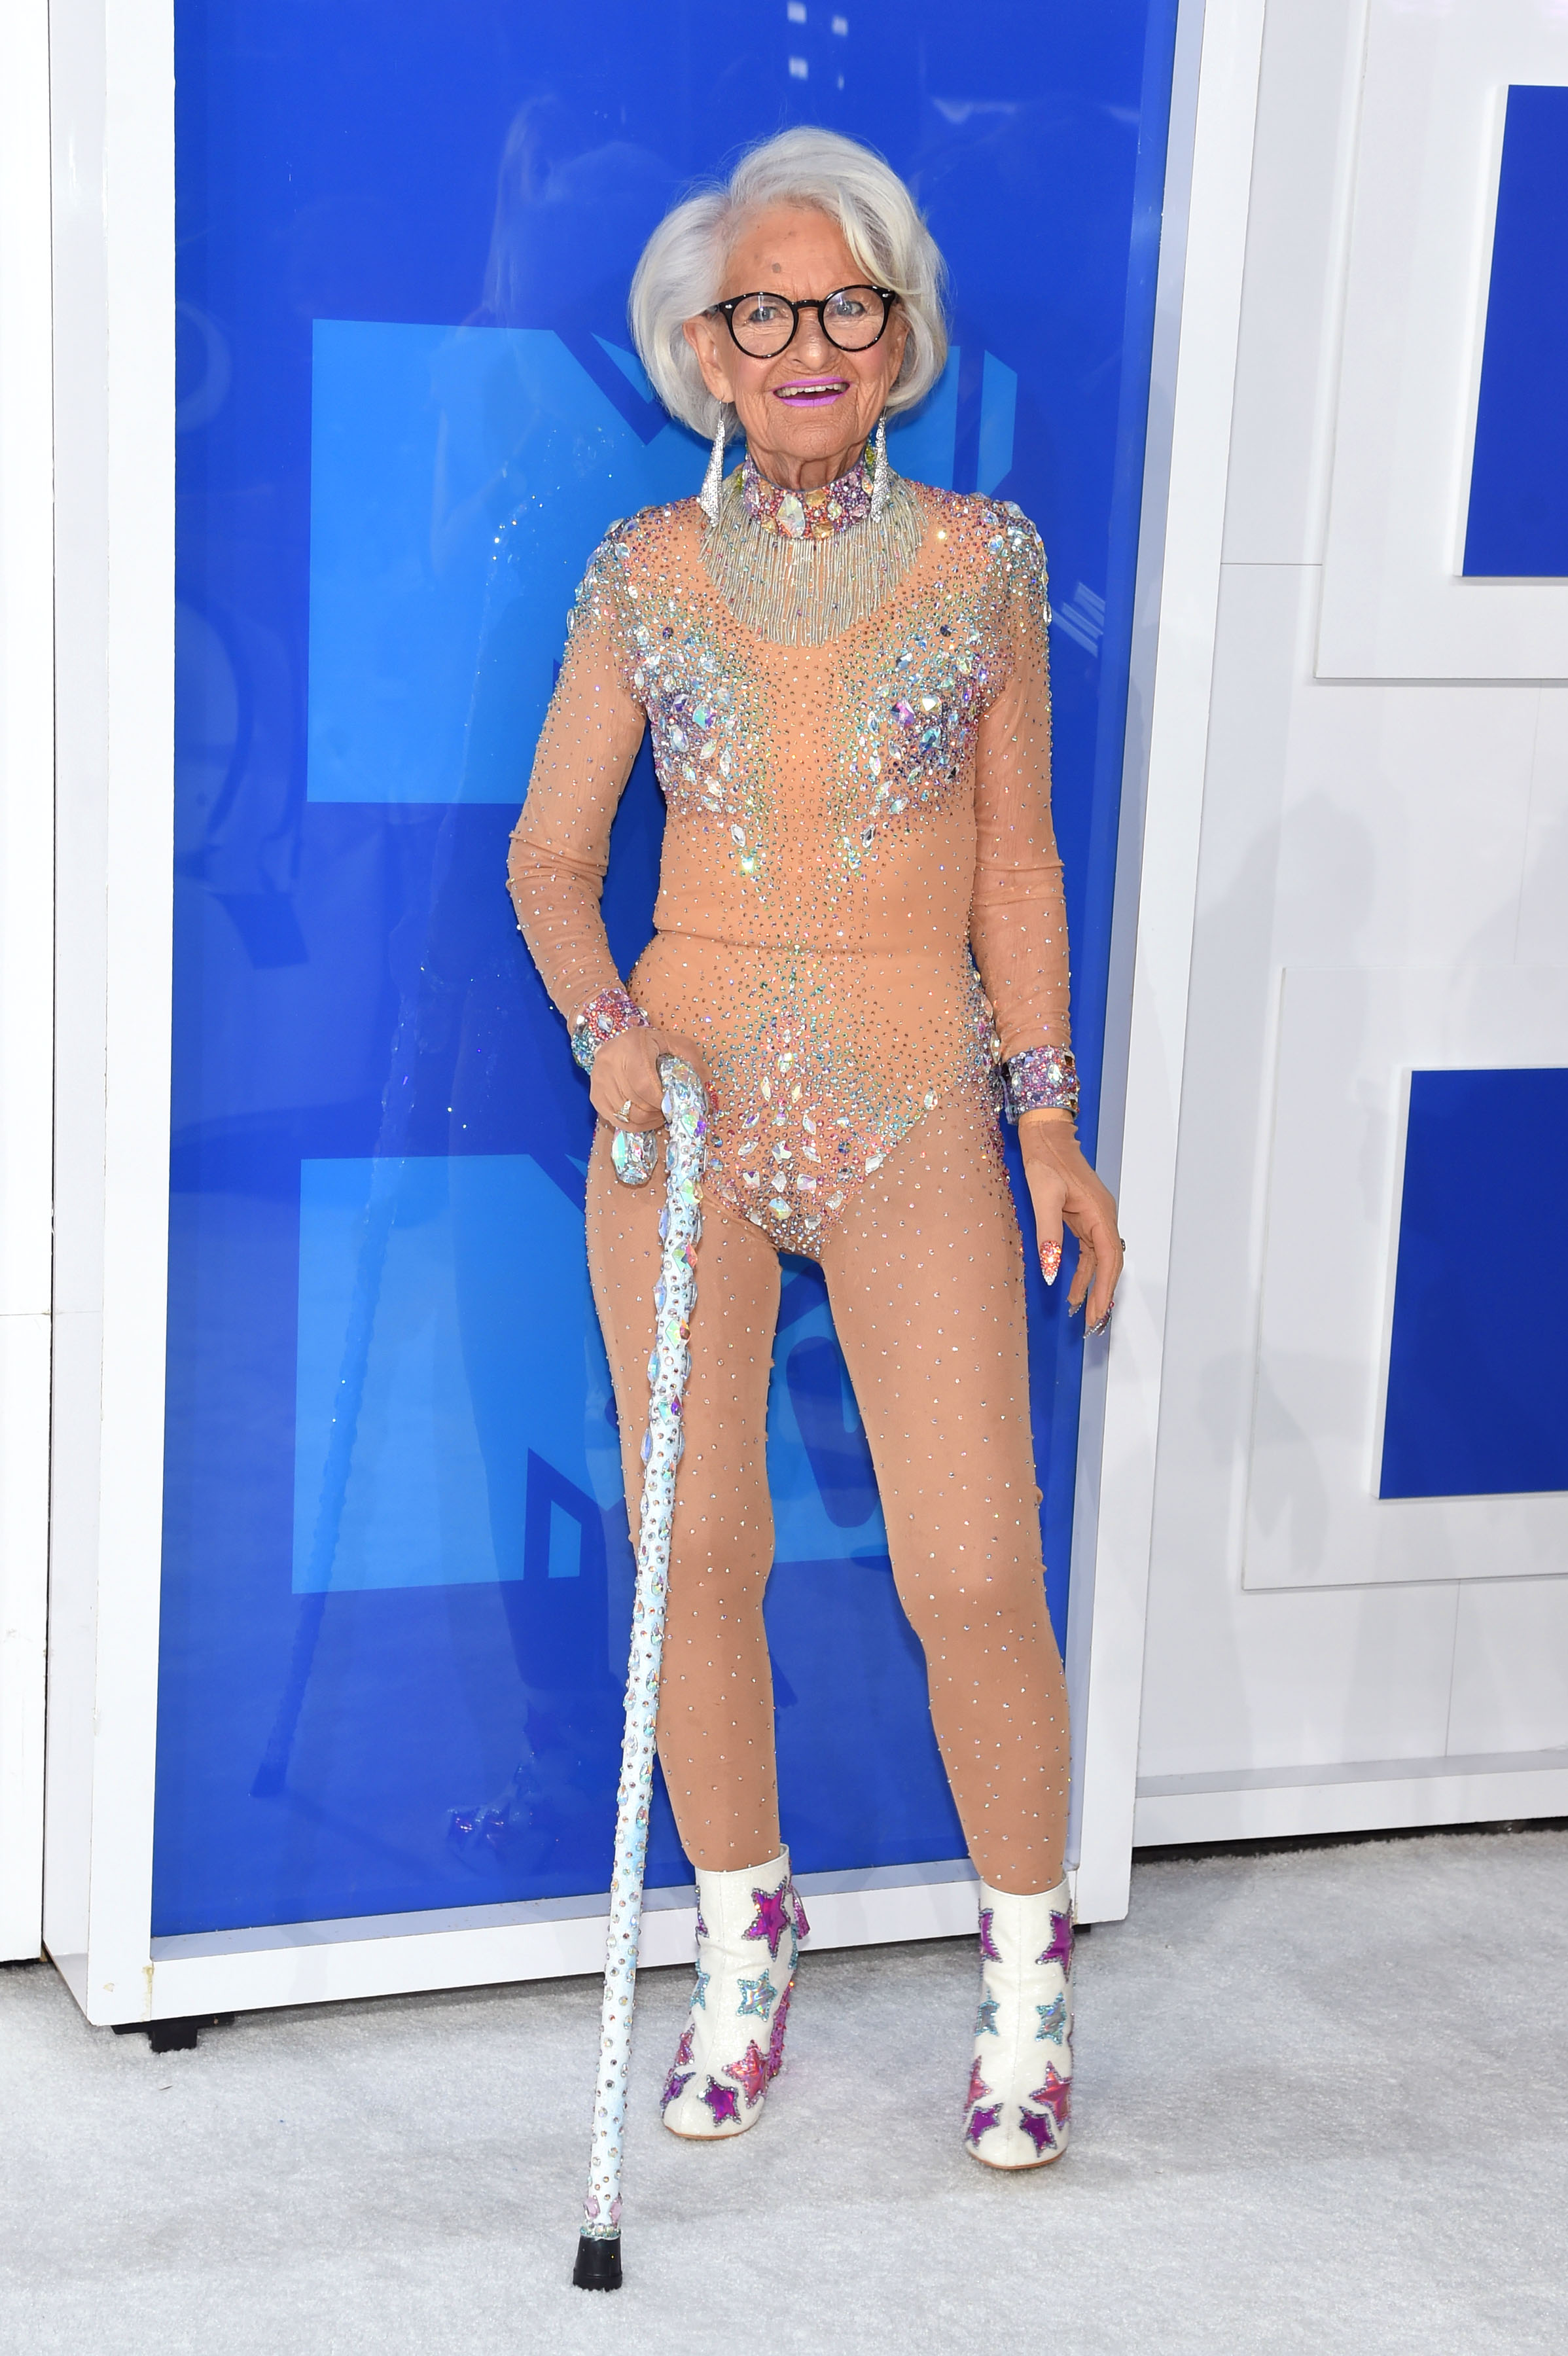 Baddie Winkle attends the 2016 MTV Video Music Awards at Madison Square Garden on Aug. 28, 2016 in New York City.